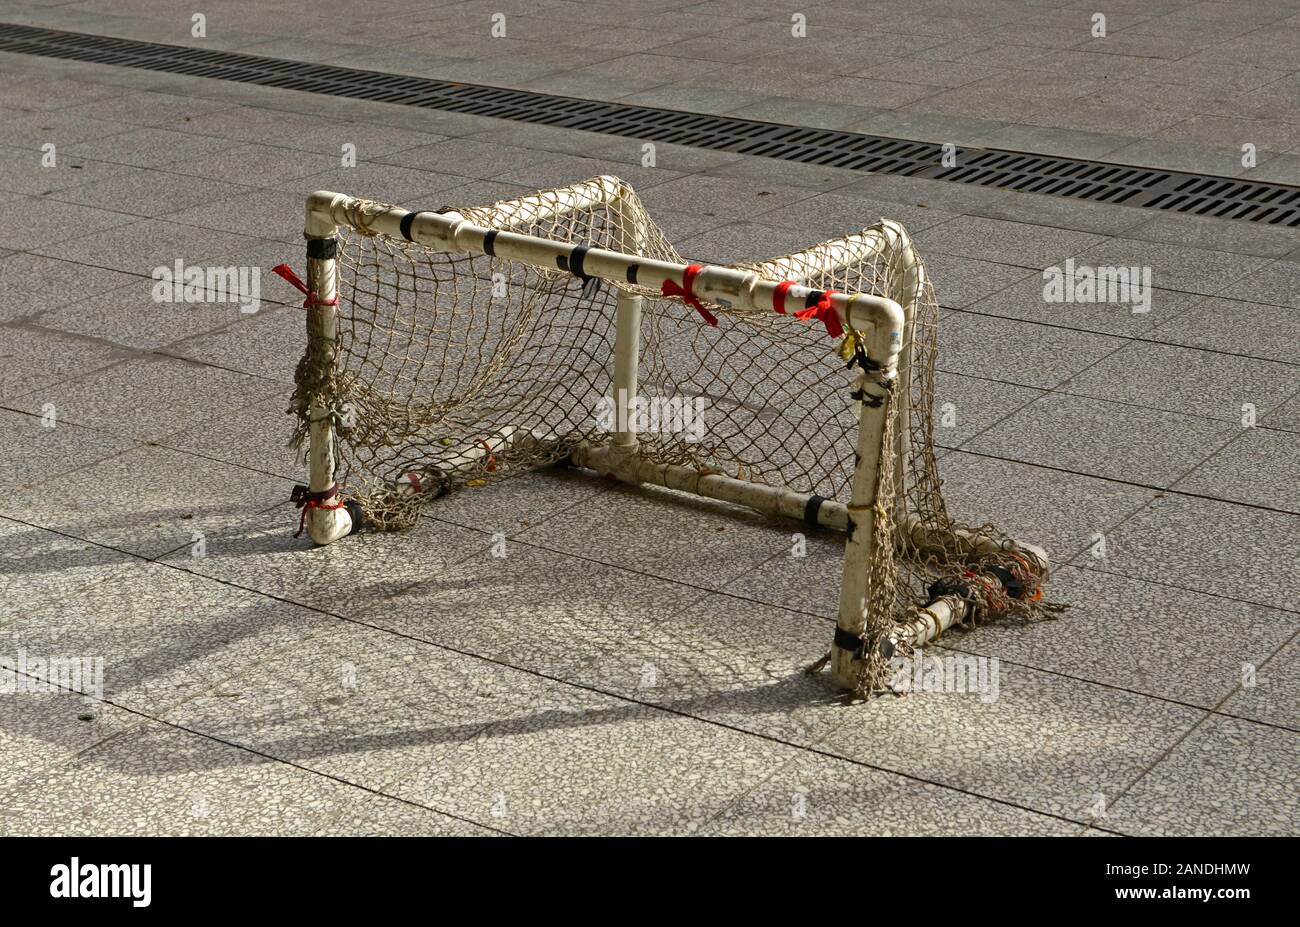 Small goals for mini-football or hockey in a pedestrianised area near Yongdingmen gate in southern Beijing, China Stock Photo